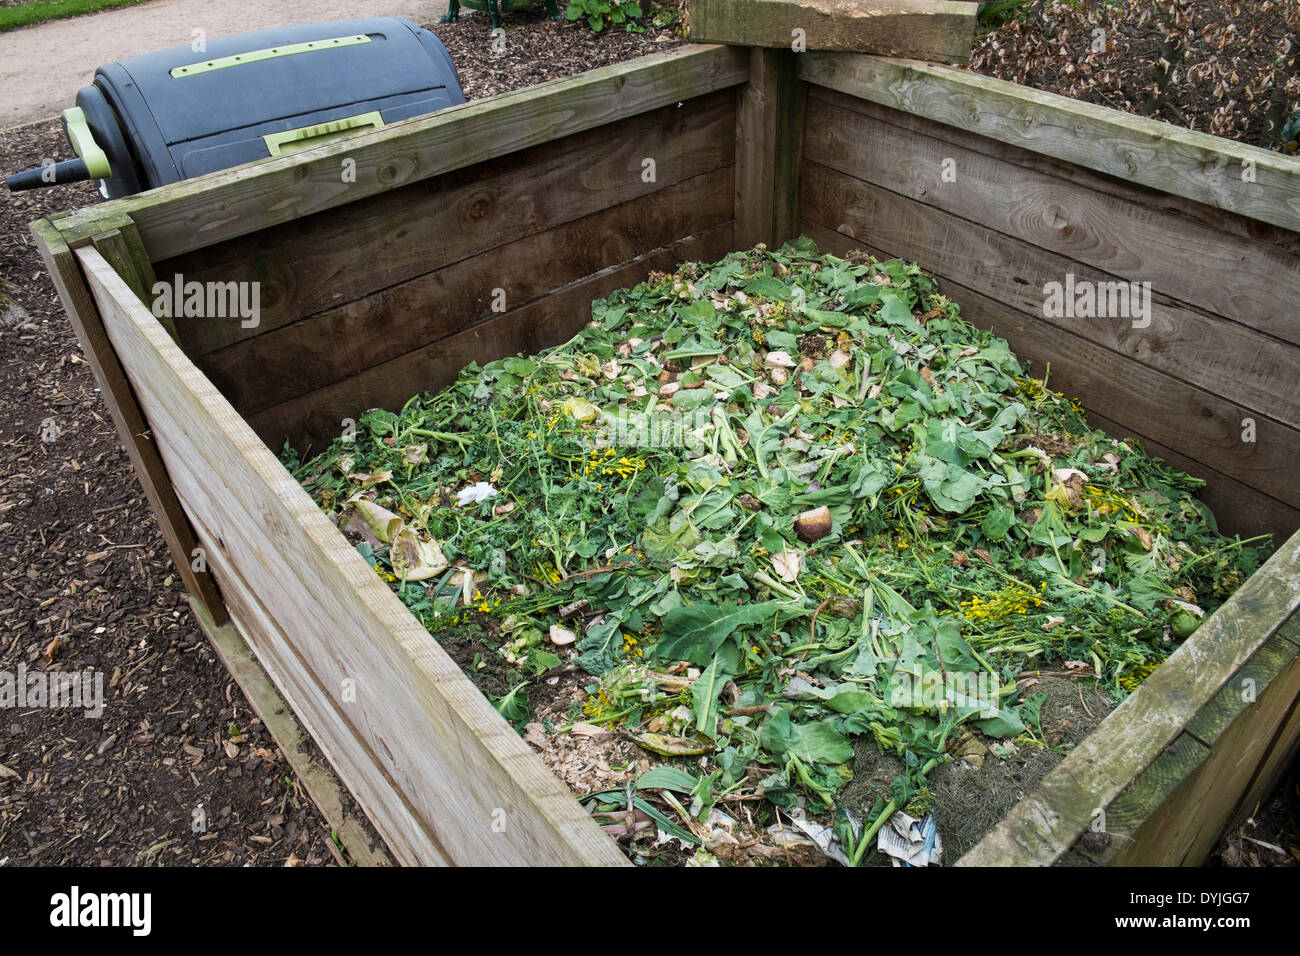 Green produce rotting in a wooden compost bin. Stock Photo